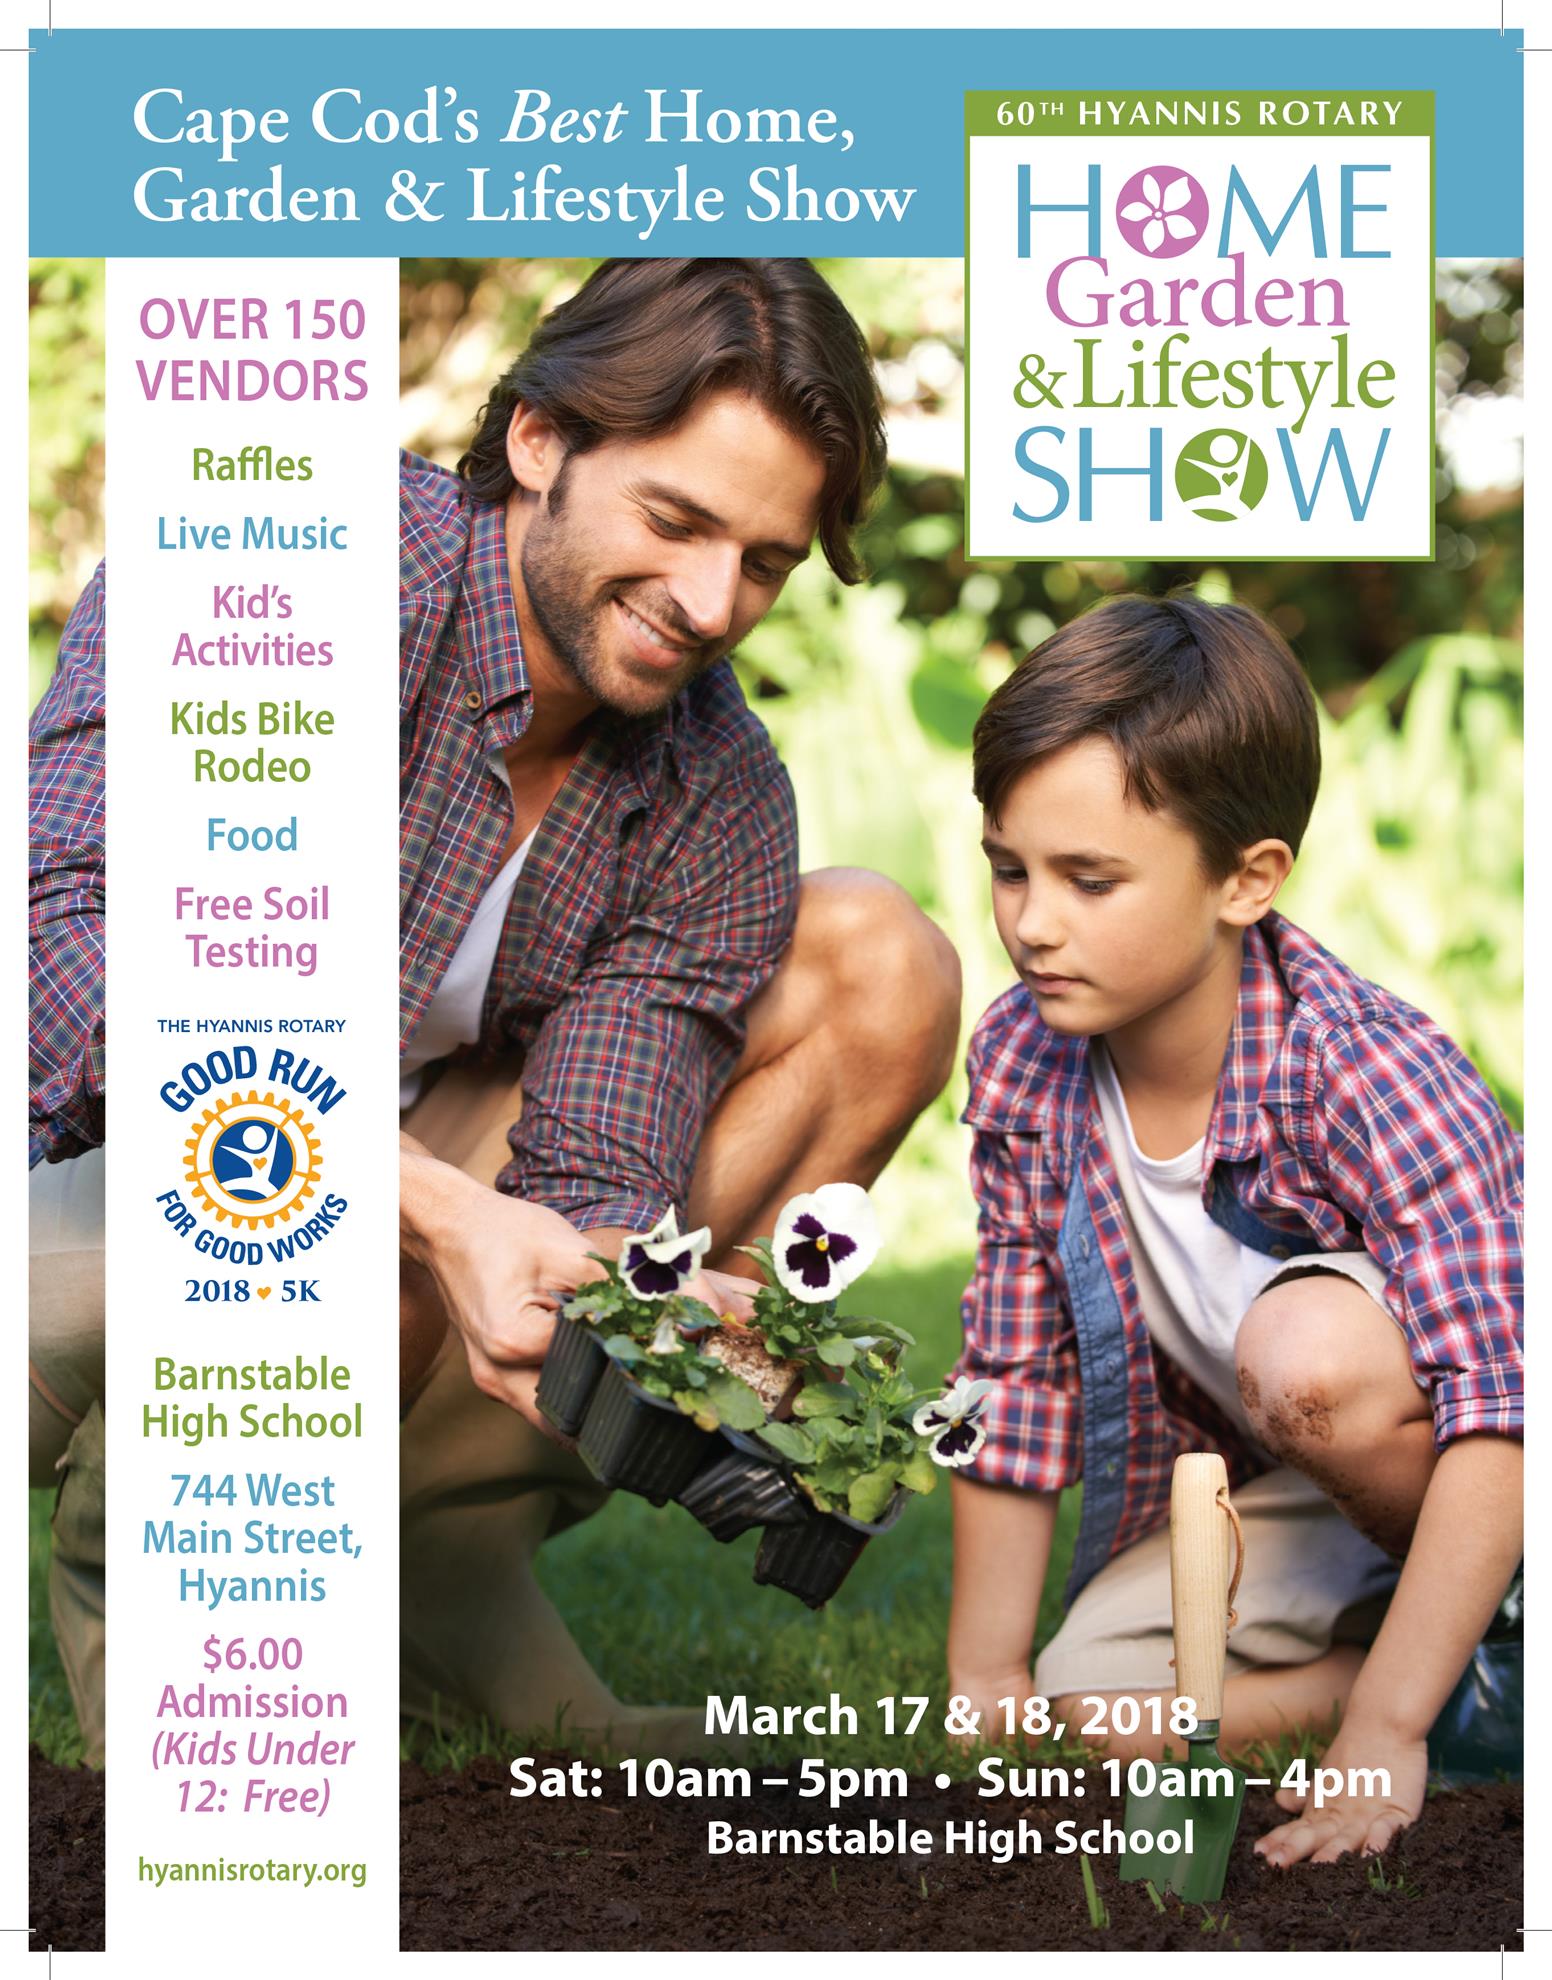 Home Garden and Lifestyle Show So Much Happening! Rotary Club of